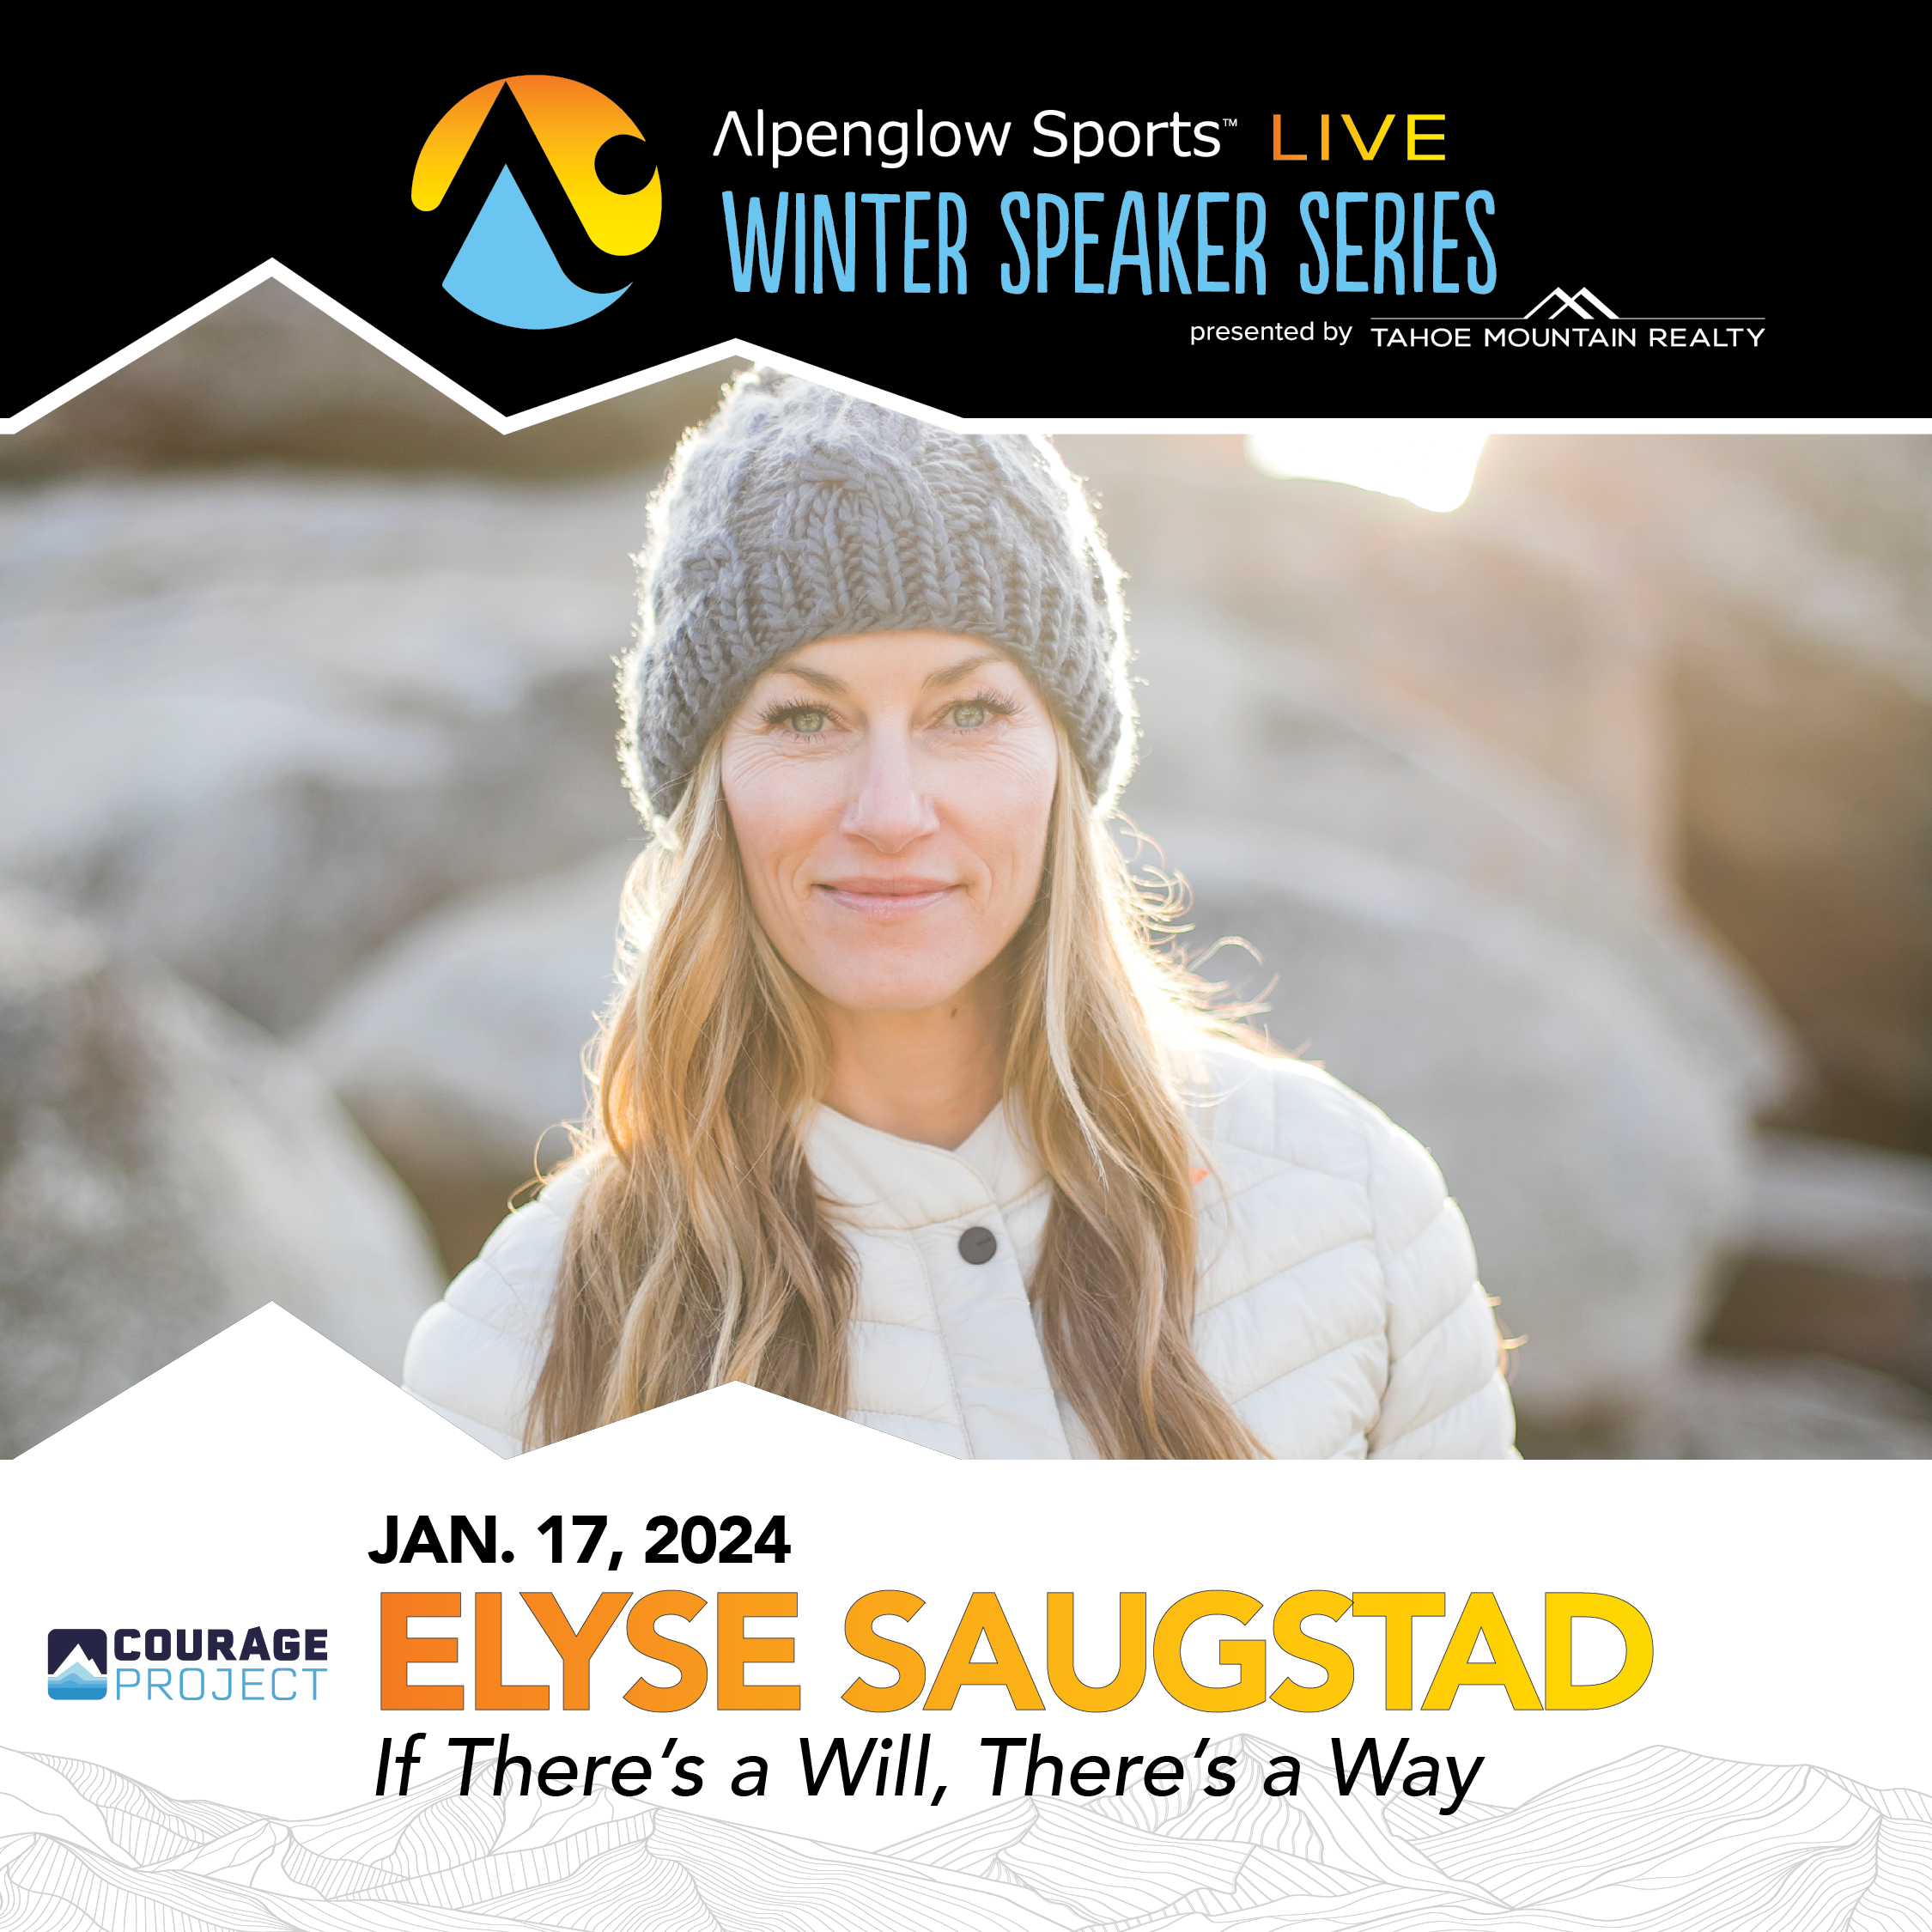 JAN. 17, 2024 ELYSE SAUGSTAD If There's a Will, There's a Way